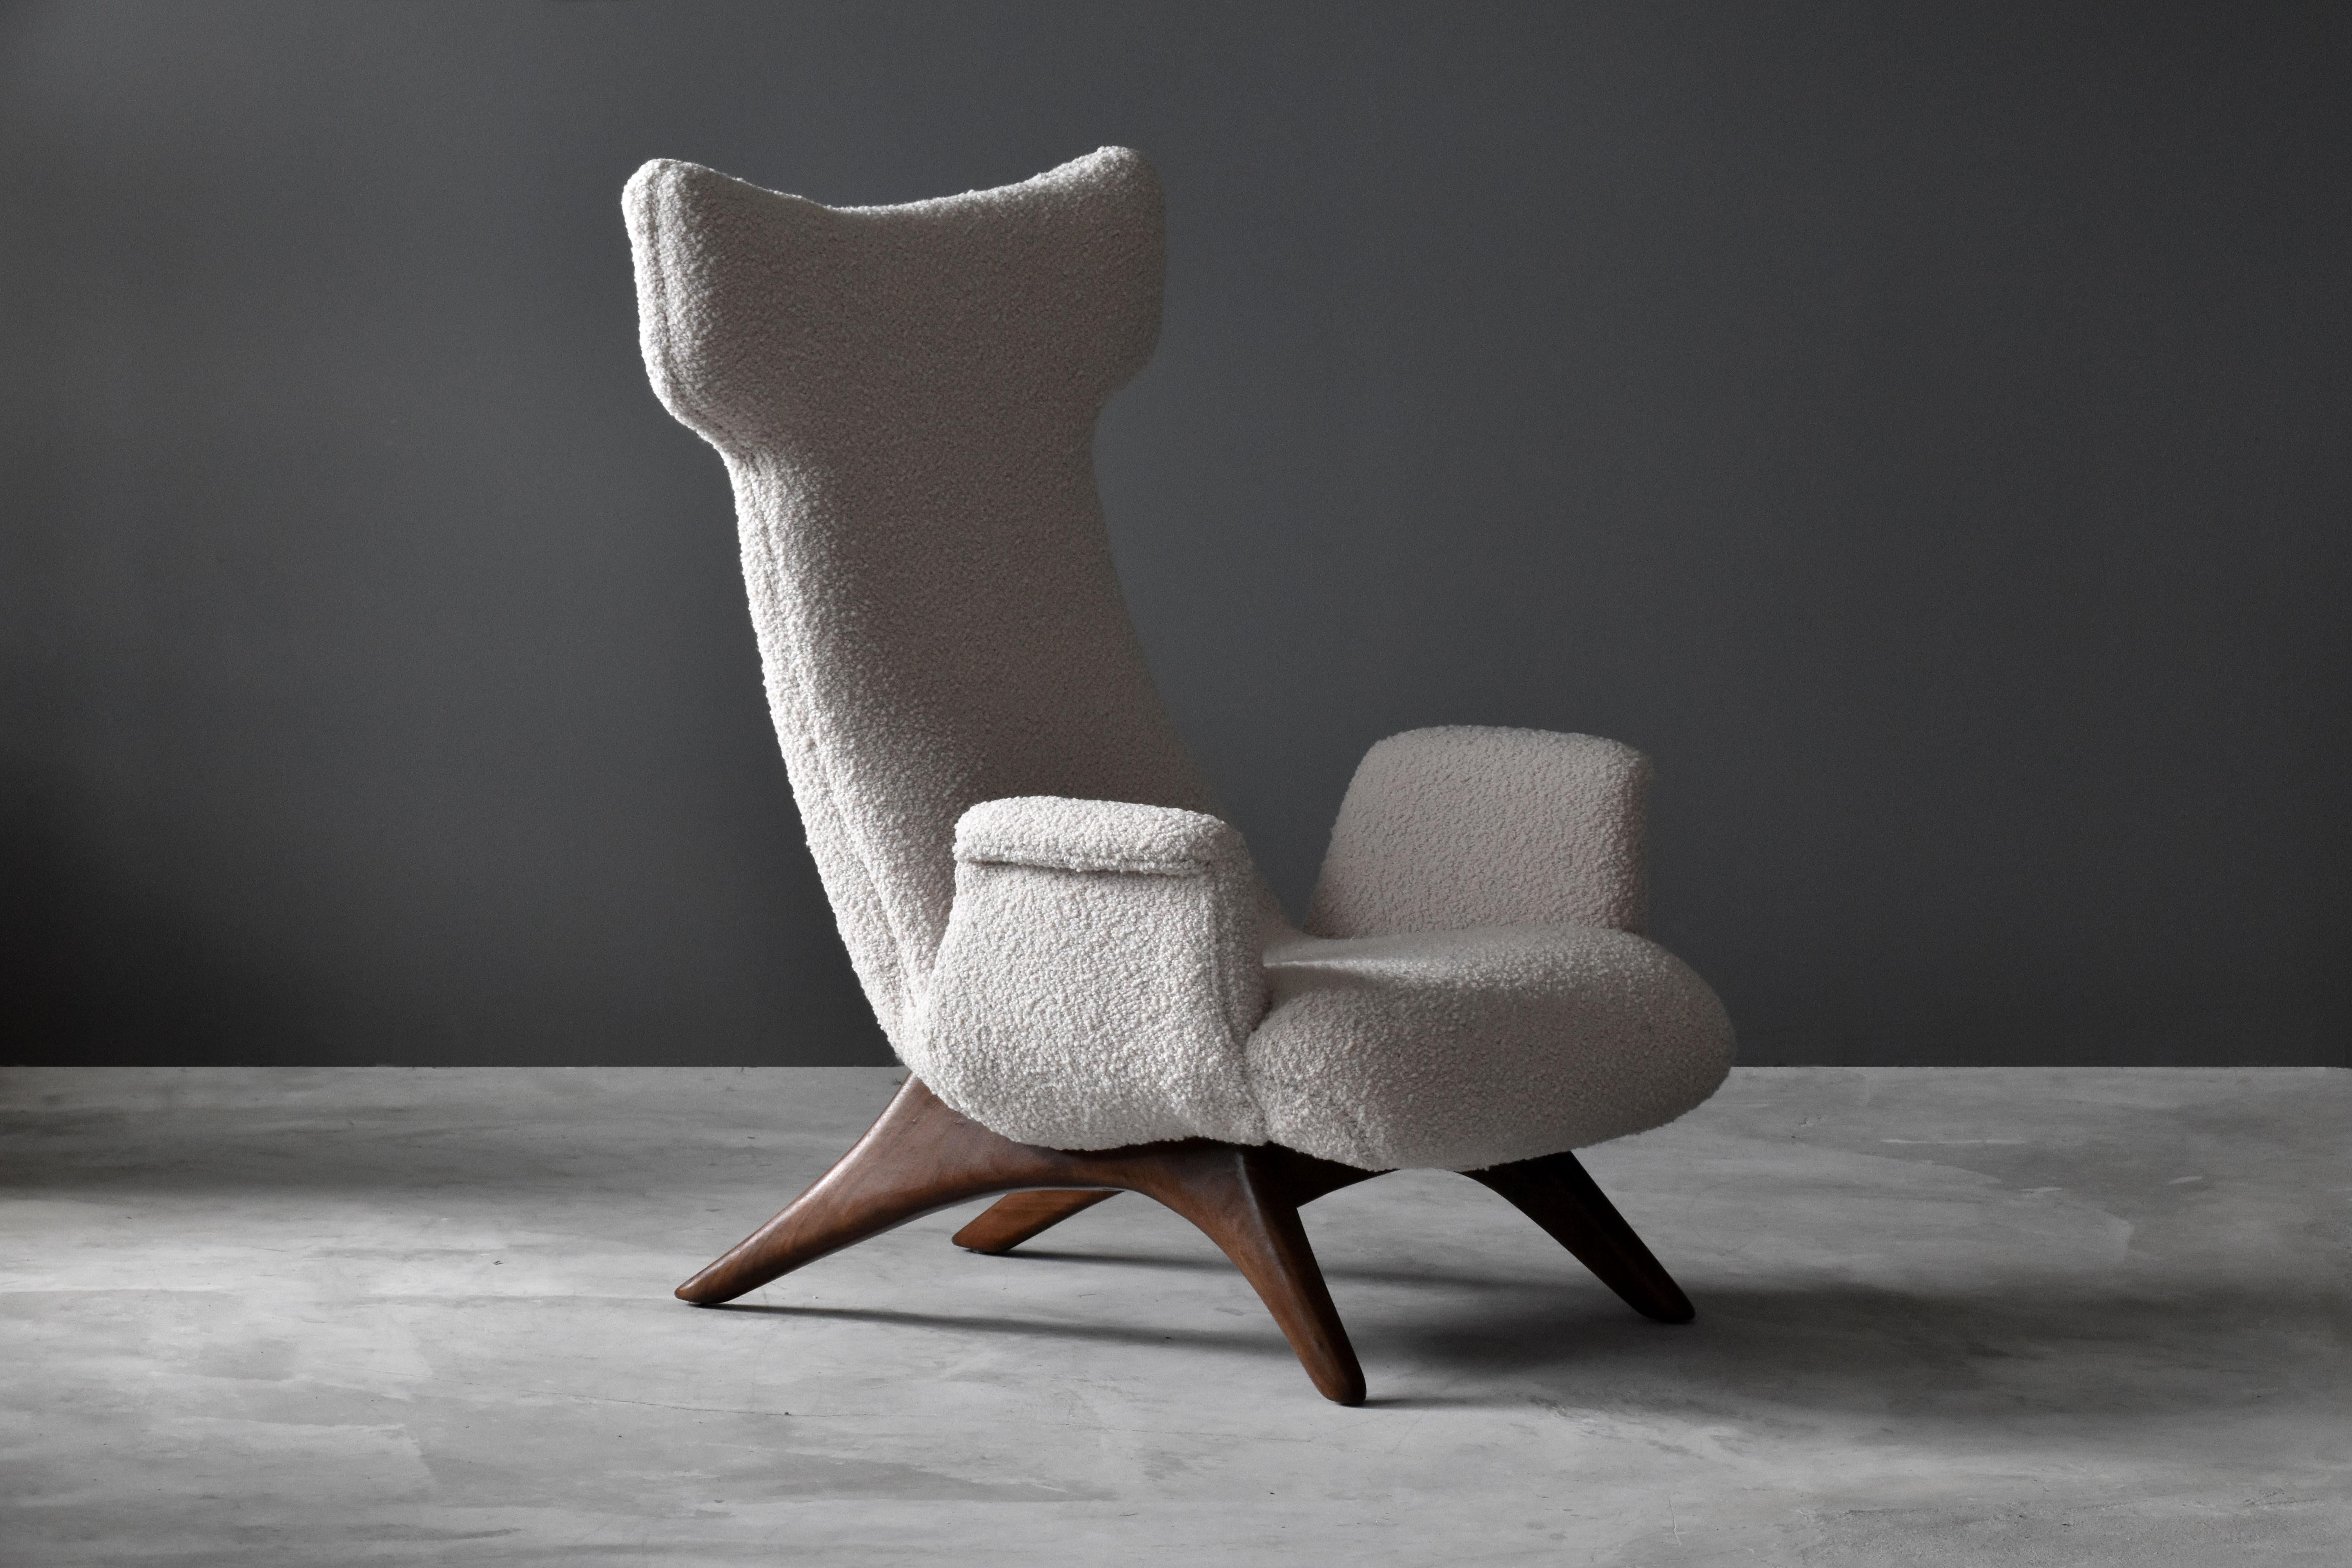 A rare wingback lounge chair, model no. 503. The soft organic forms are further enhanced by the high end bouclé fabric. Frame rests on a finely carved walnut base. Designed in the 1950s, this vintage example is produced in the 1990s, within the